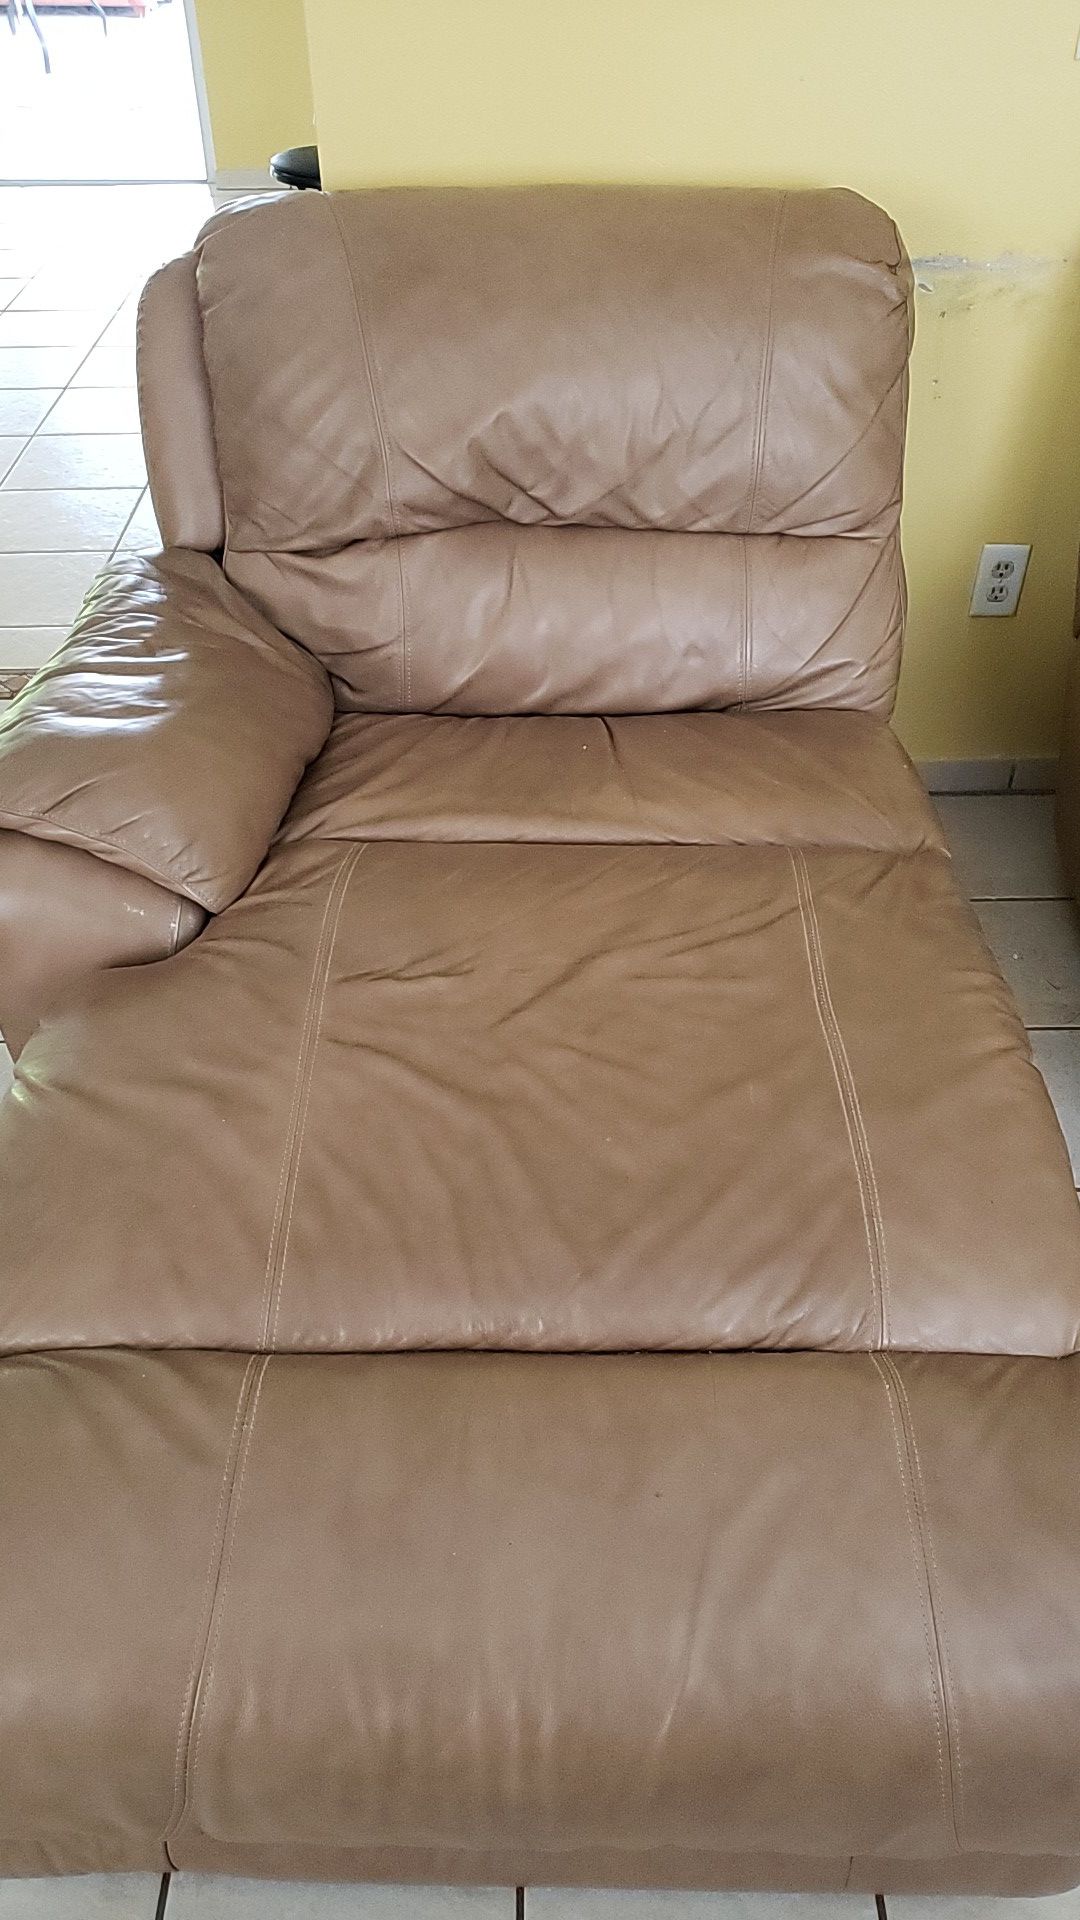 Sofa / couch